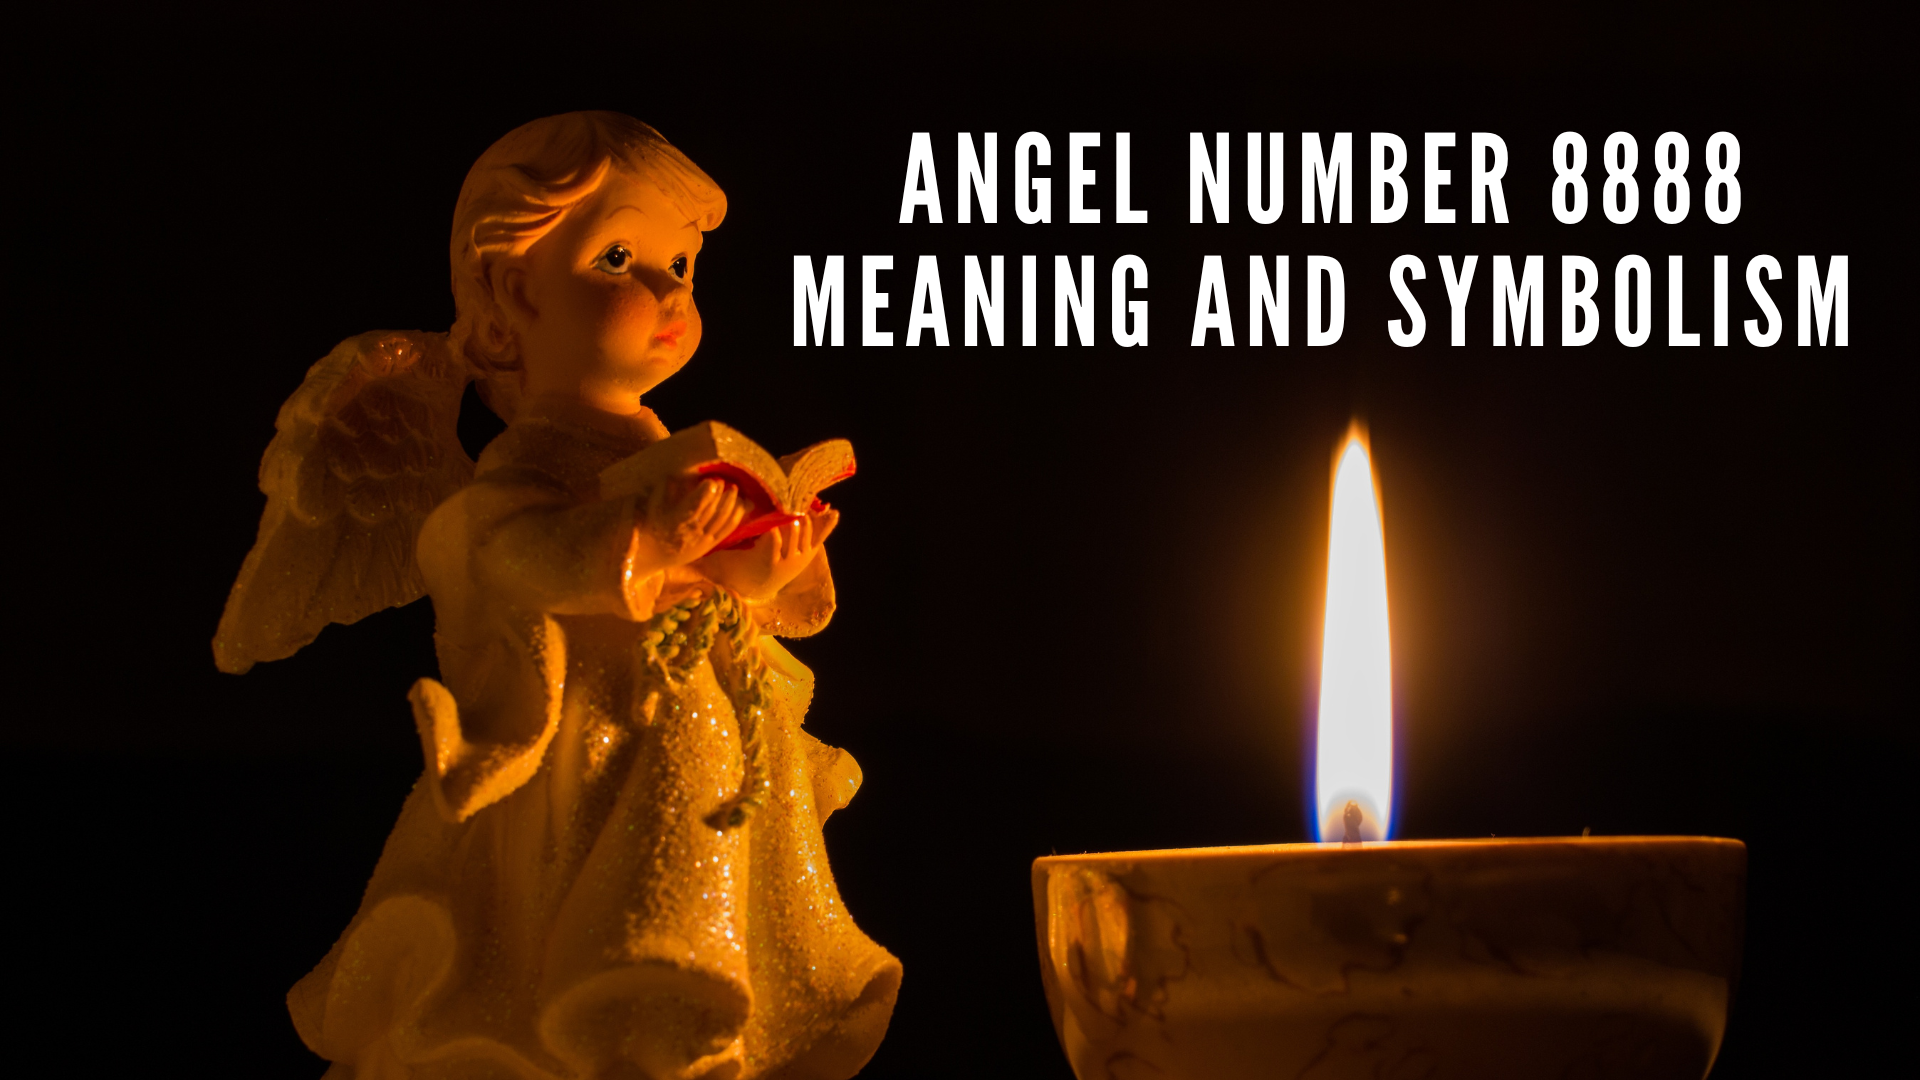 An angel figurine and a candle with words Angel Number 8888 Meaning And Symbolism